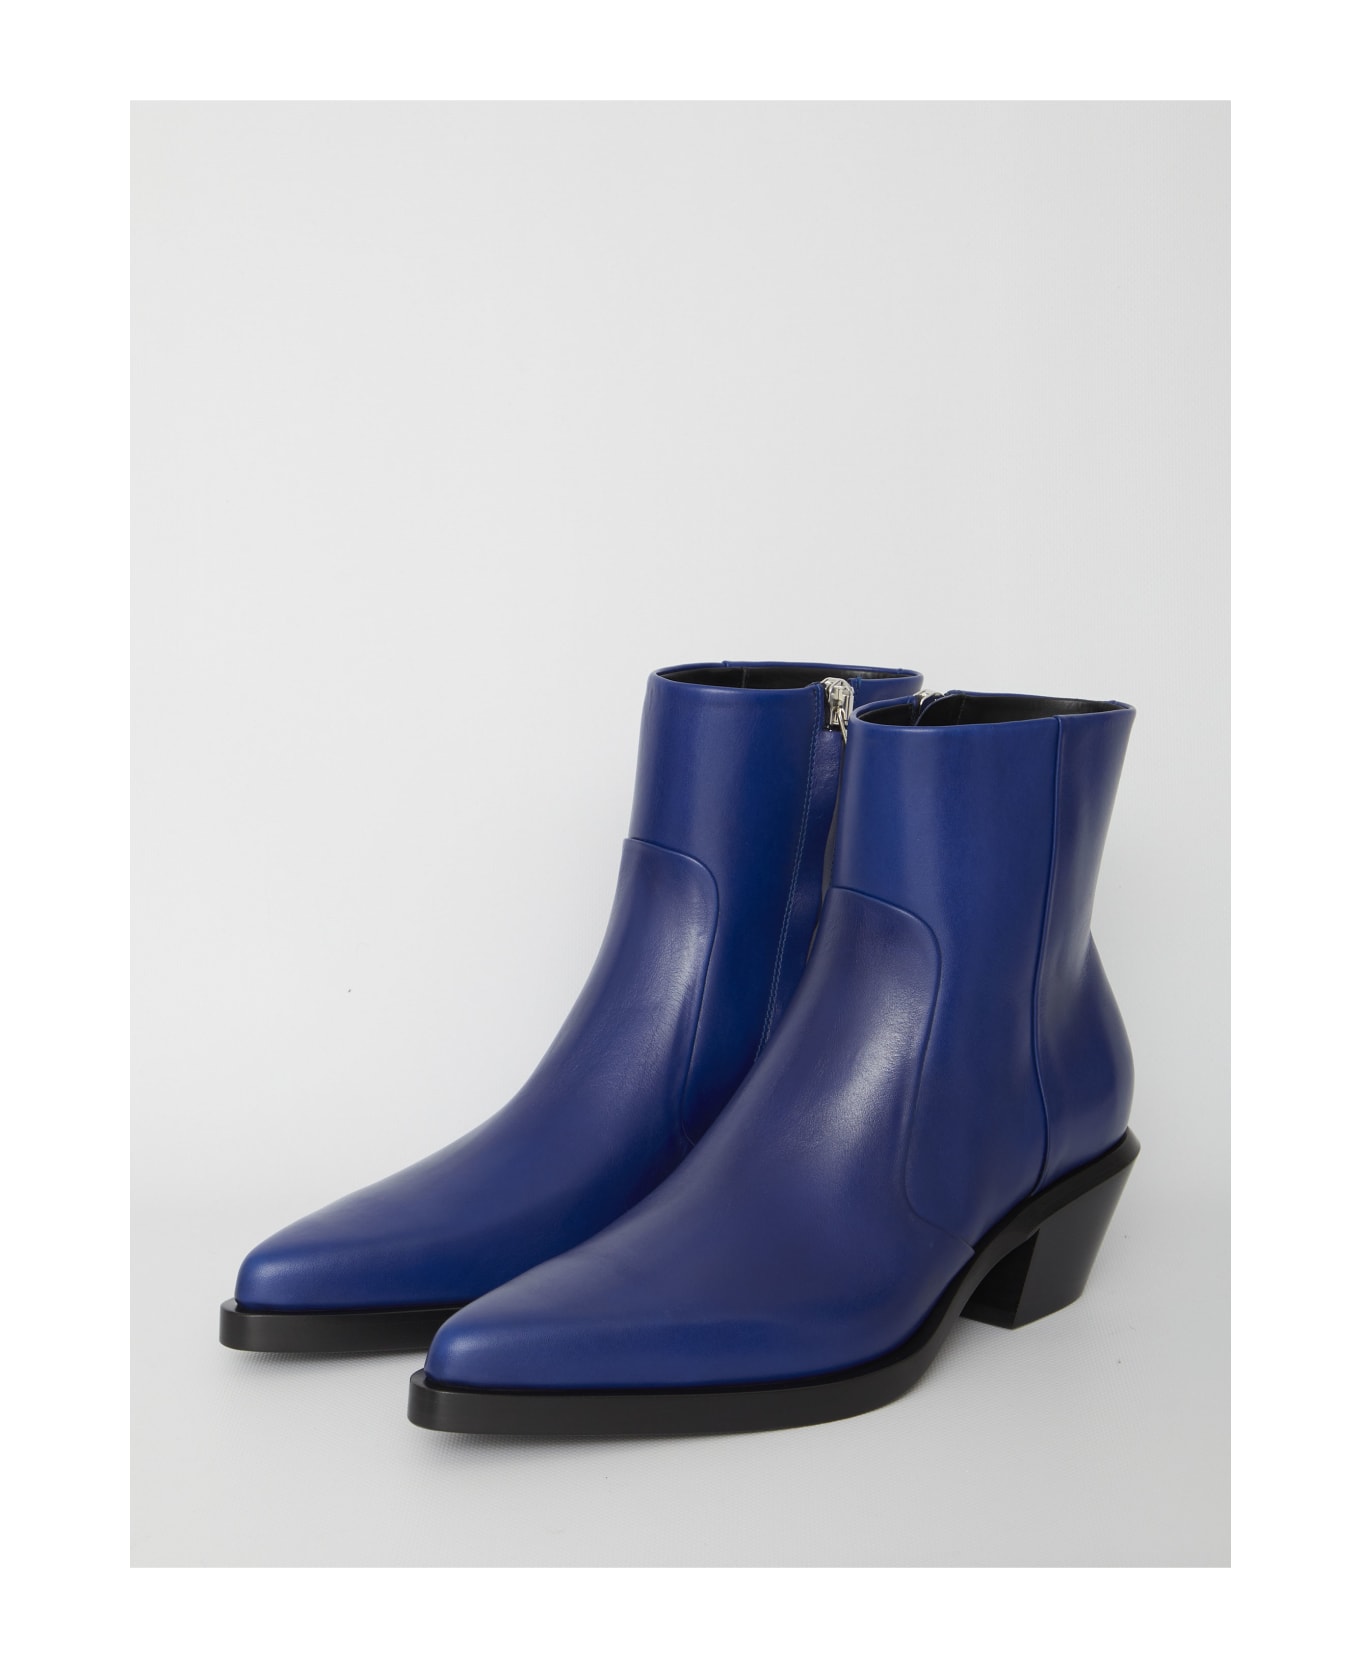 Off-White Slim Texan Ankle Boots - BLUE